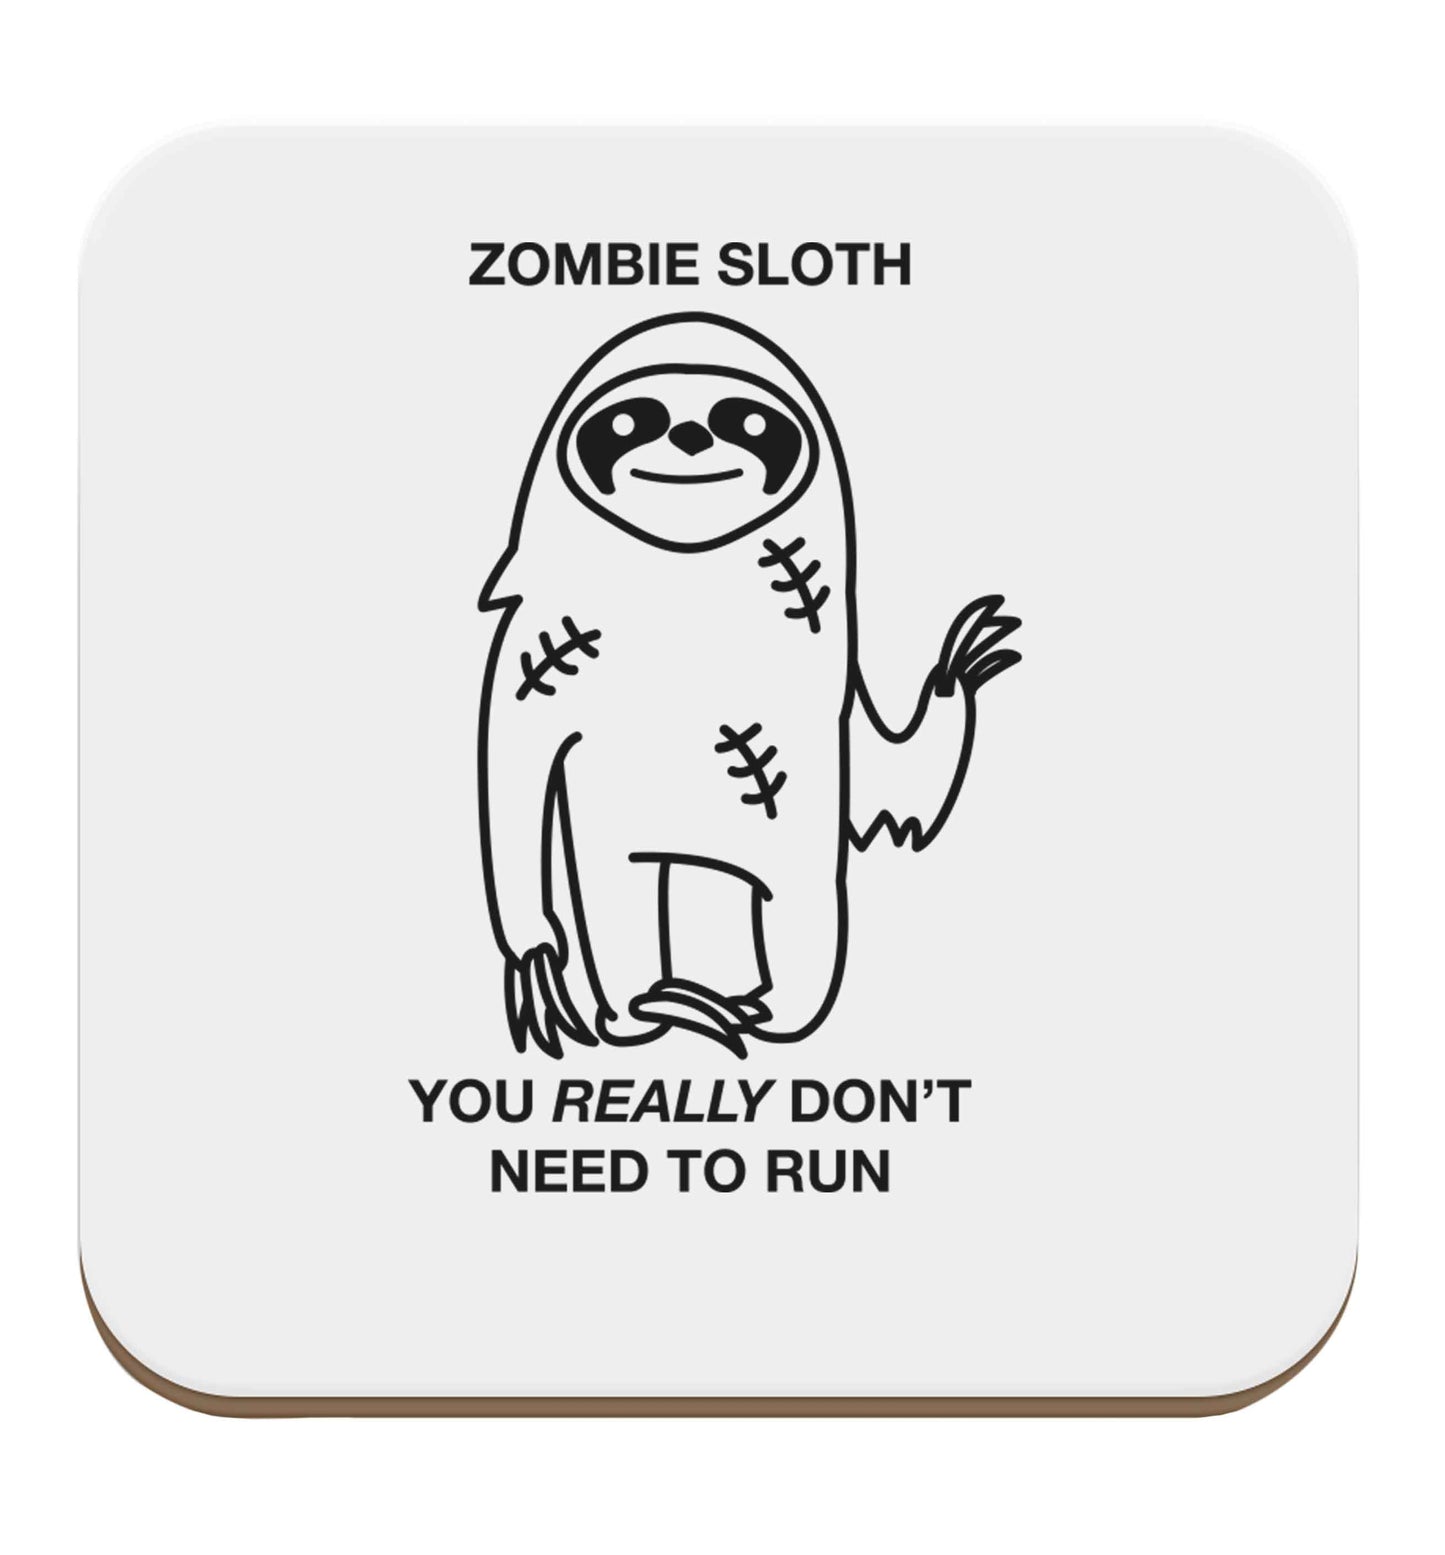 Zombie sloth you really don't need to run set of four coasters